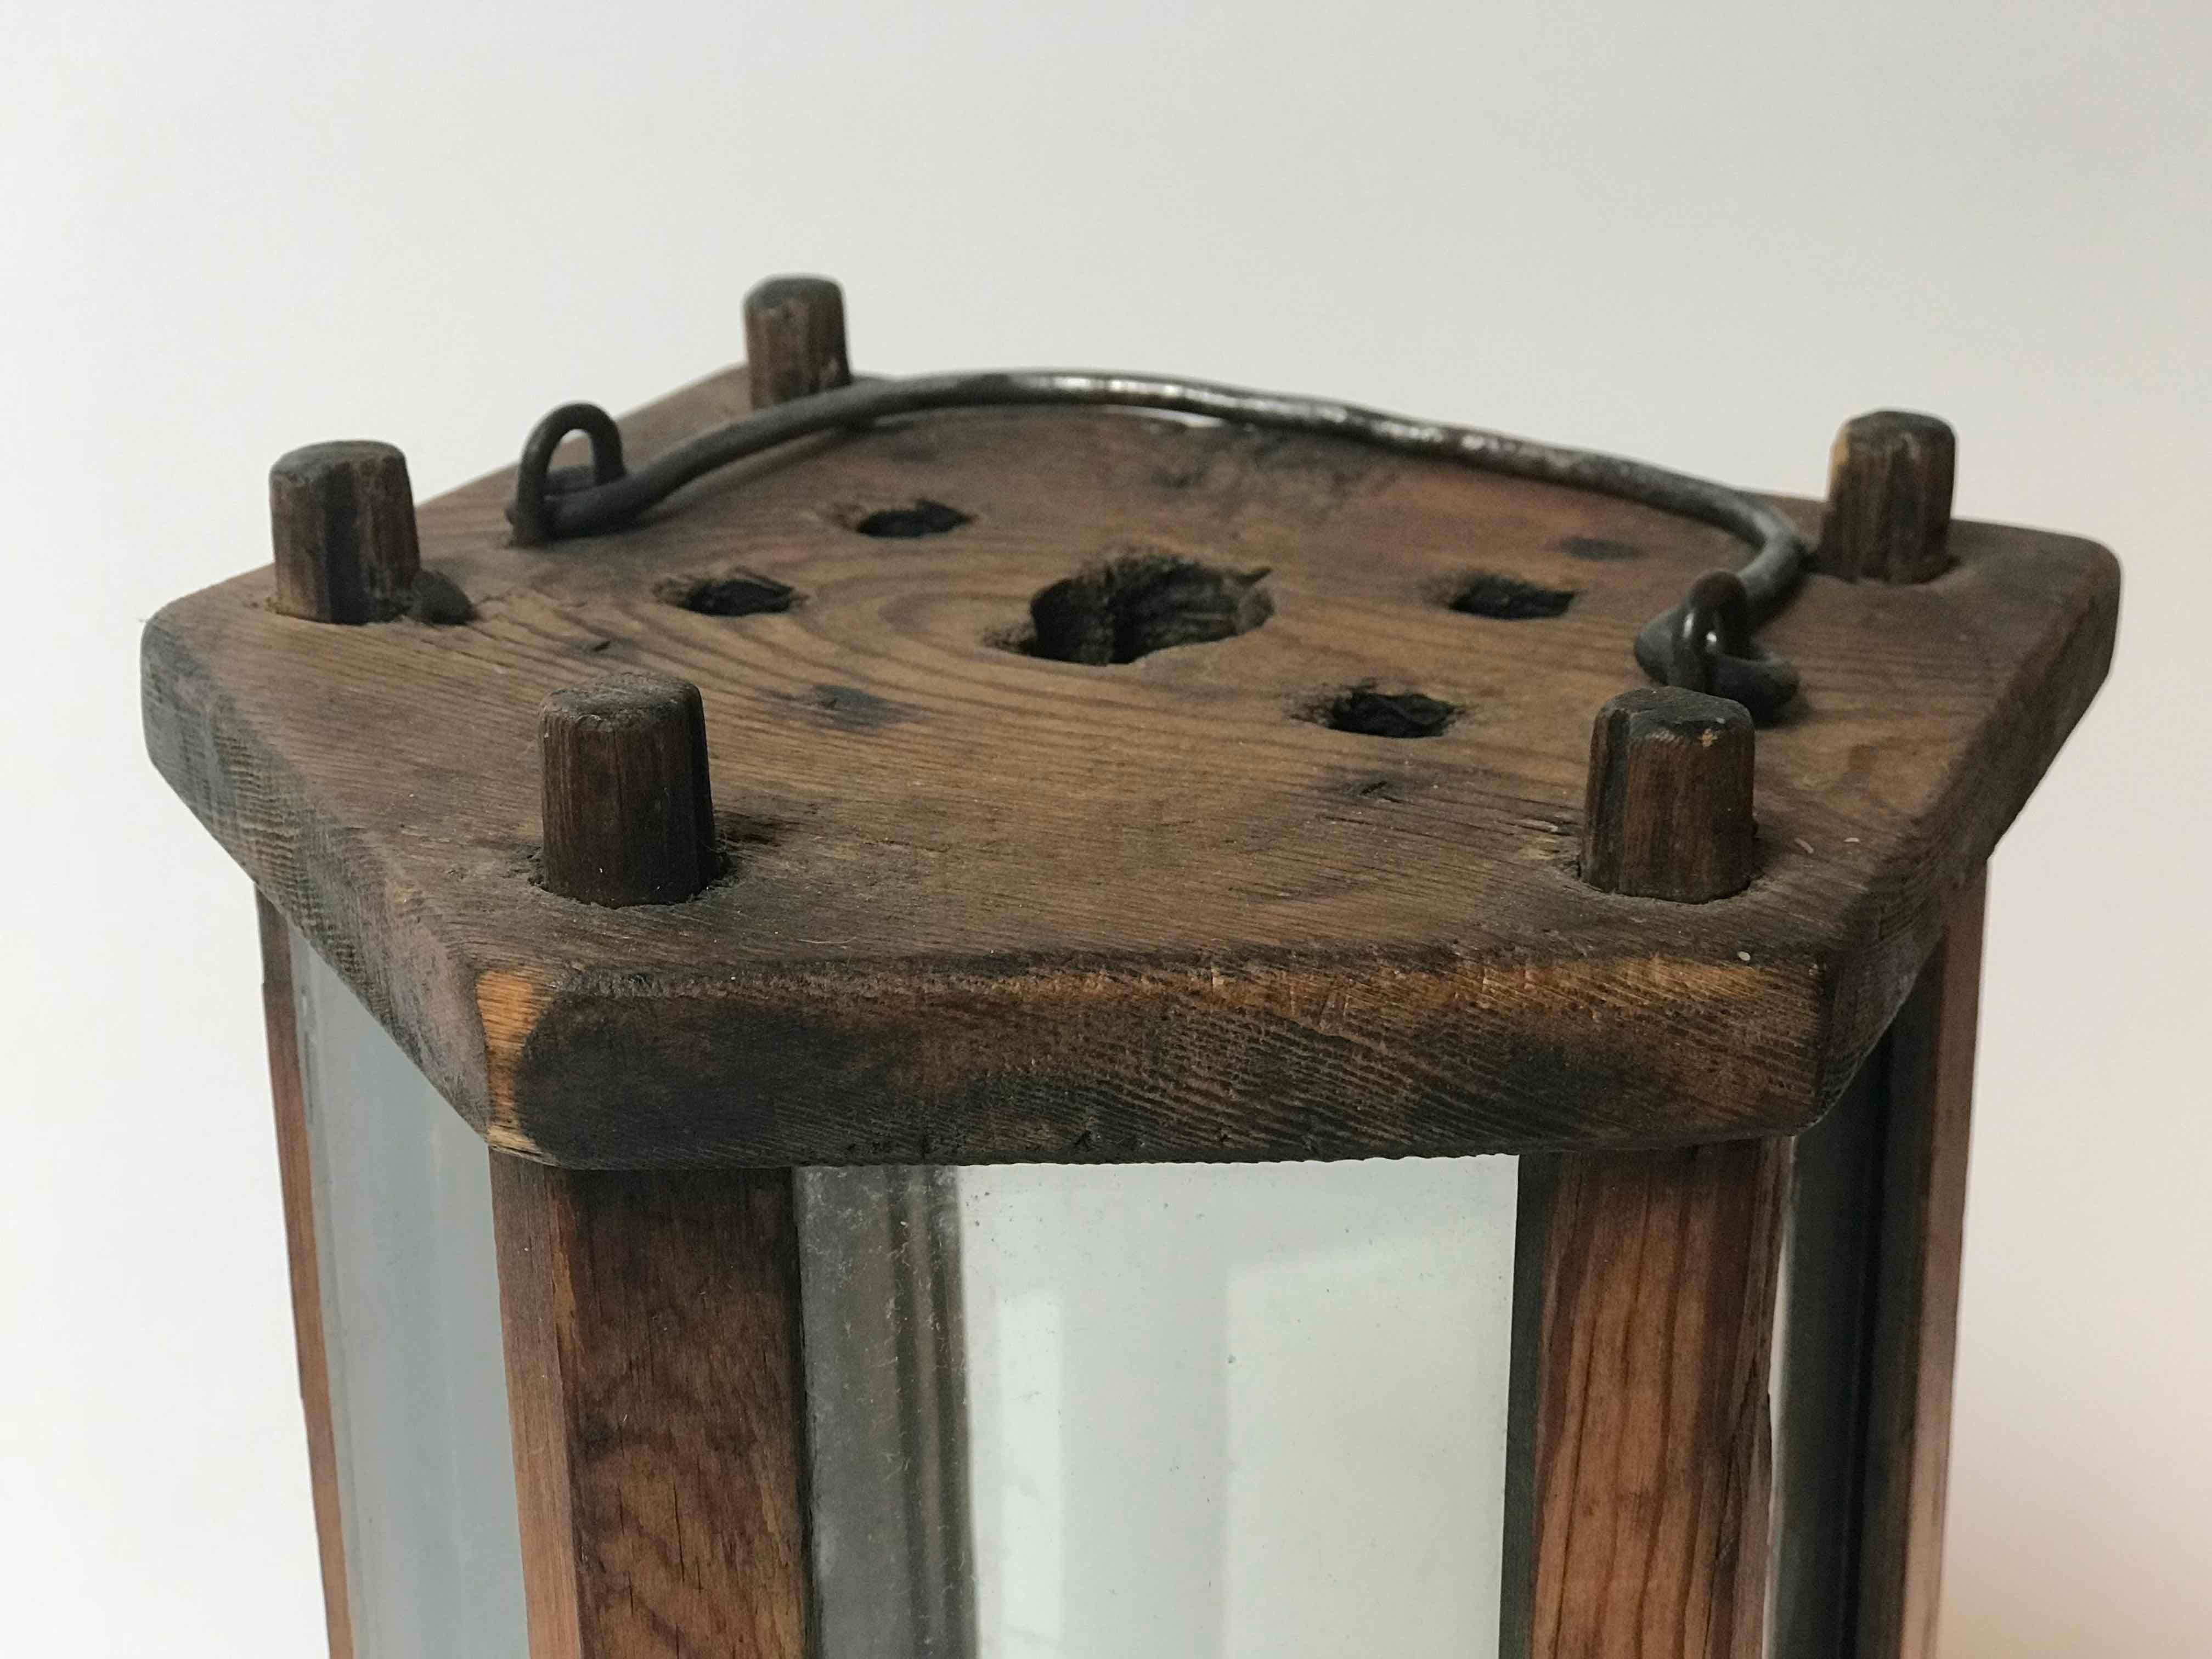 Swedish 19th-century five-sided wooden hurricane lantern or lamp with original glass siding and metal carrying handle. Notched pentagonal base holds a standard-sized taper. Rustic and understated, the patina here is exquisite—the wood aged to a